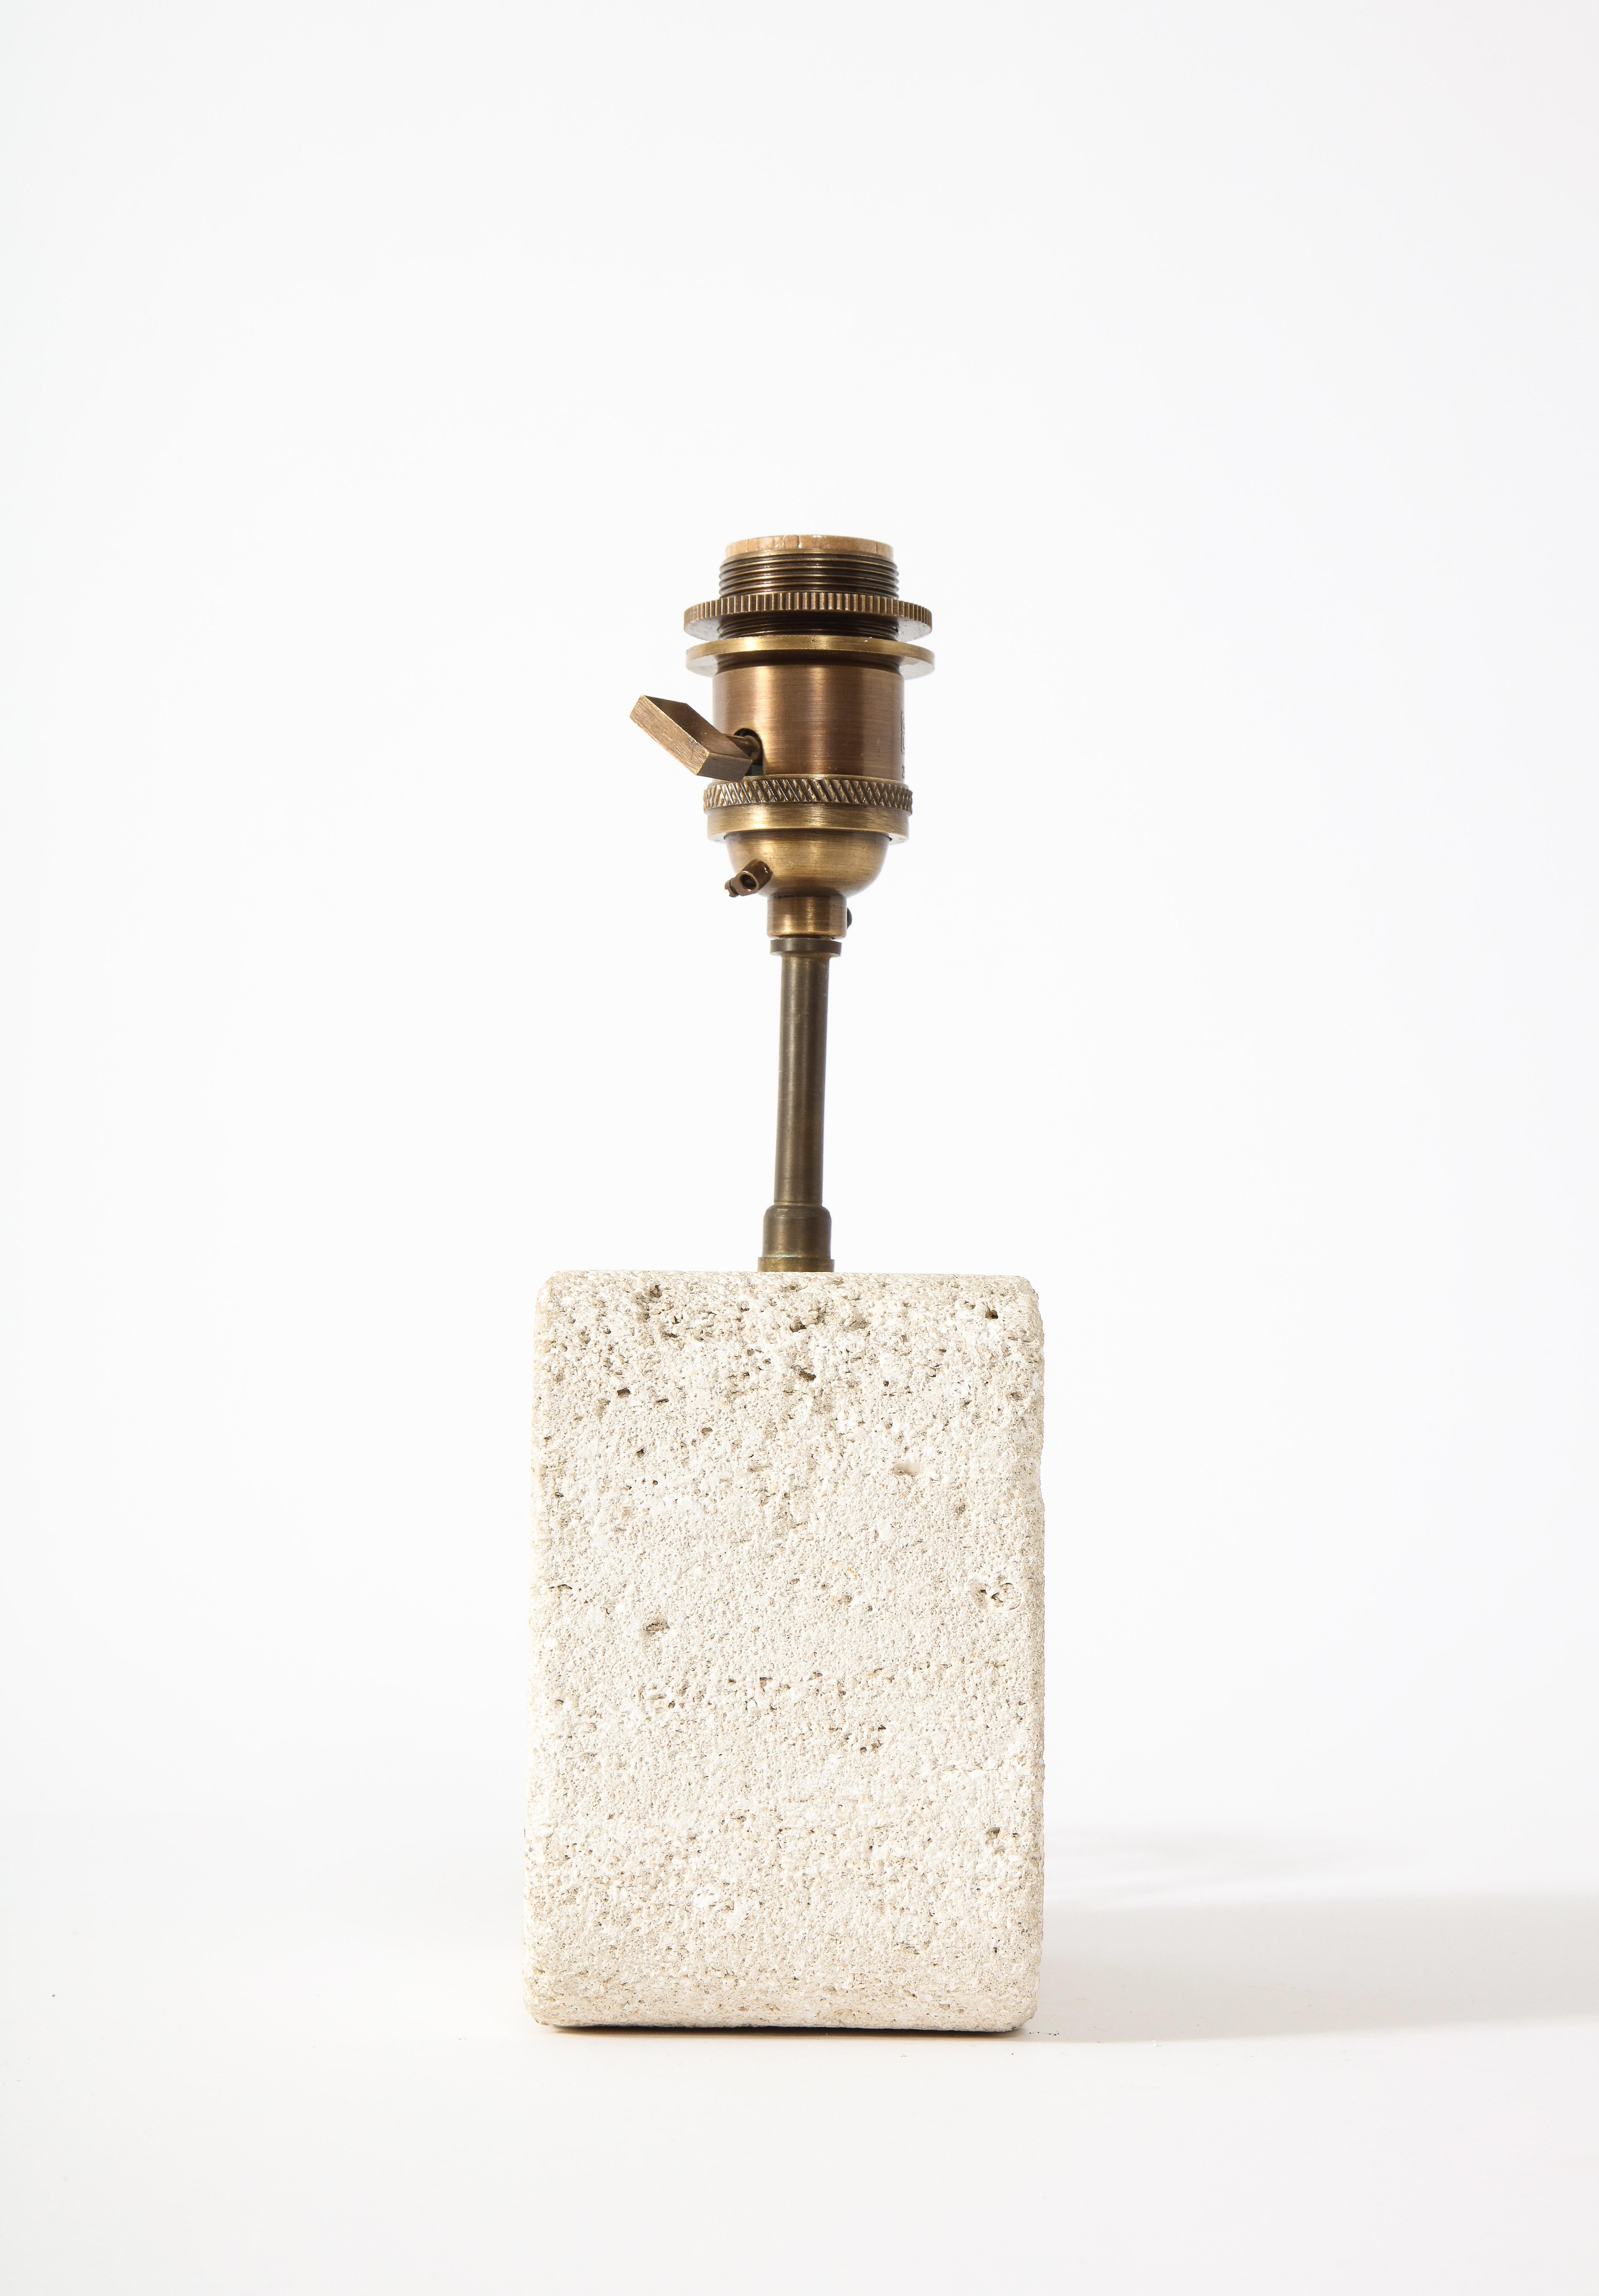 Tormos Small Limestone Table Lamp with Perforation Detail, France 1960's In Good Condition For Sale In New York, NY